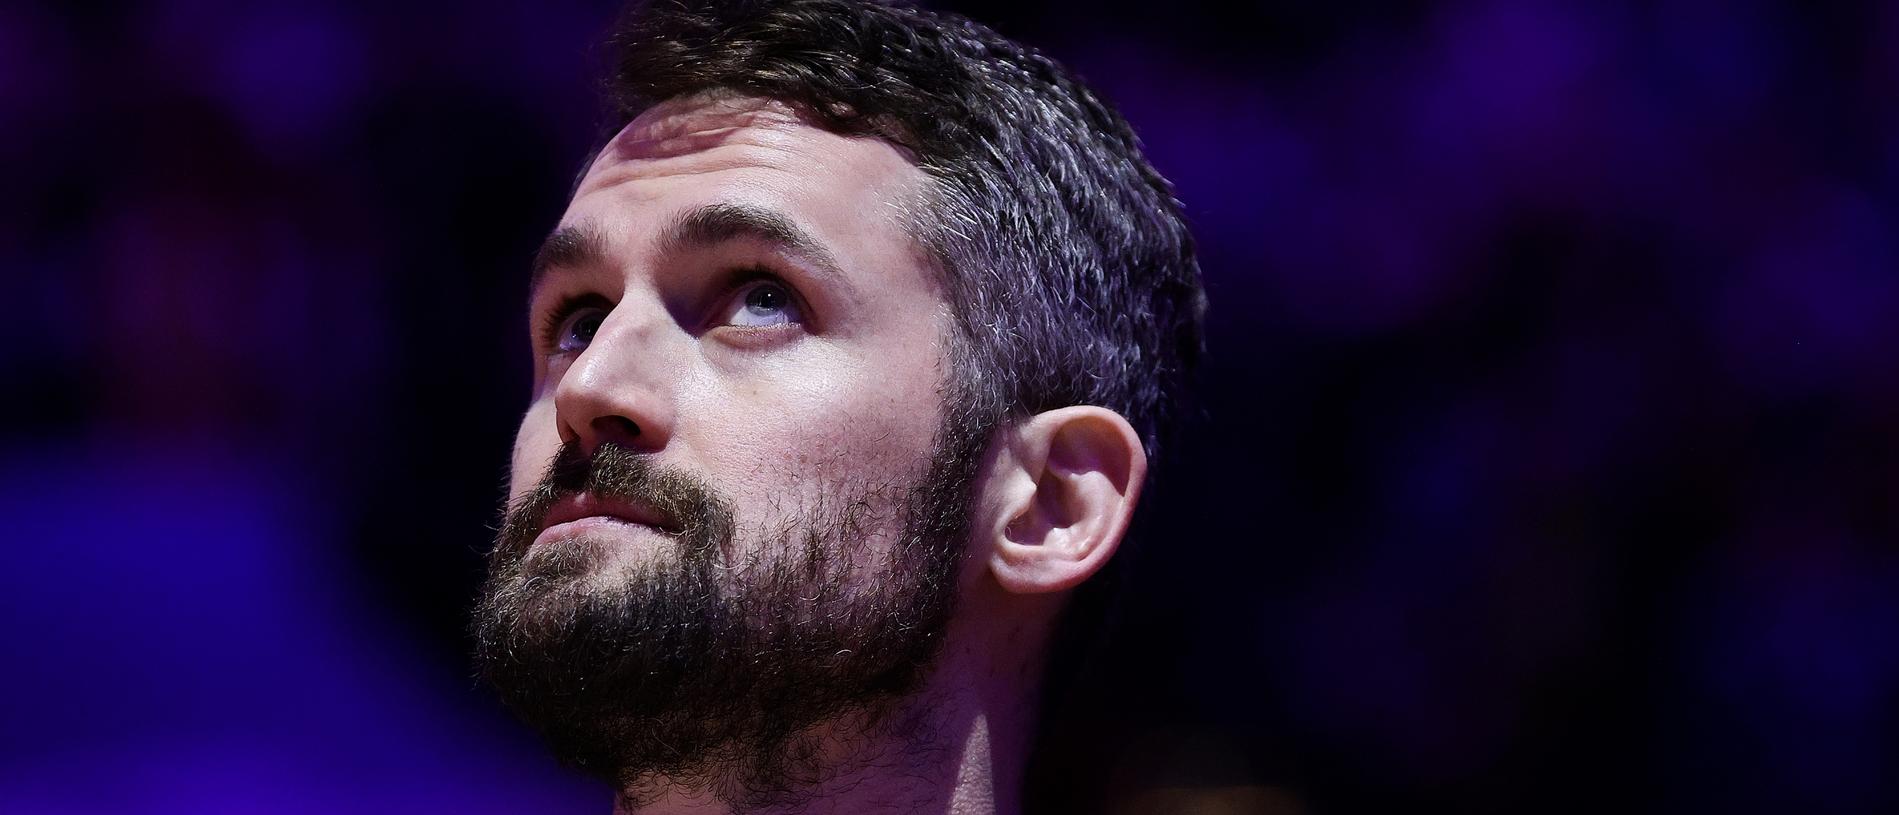 Kevin Love returning back to familiar number with Heat after Cavs buyout